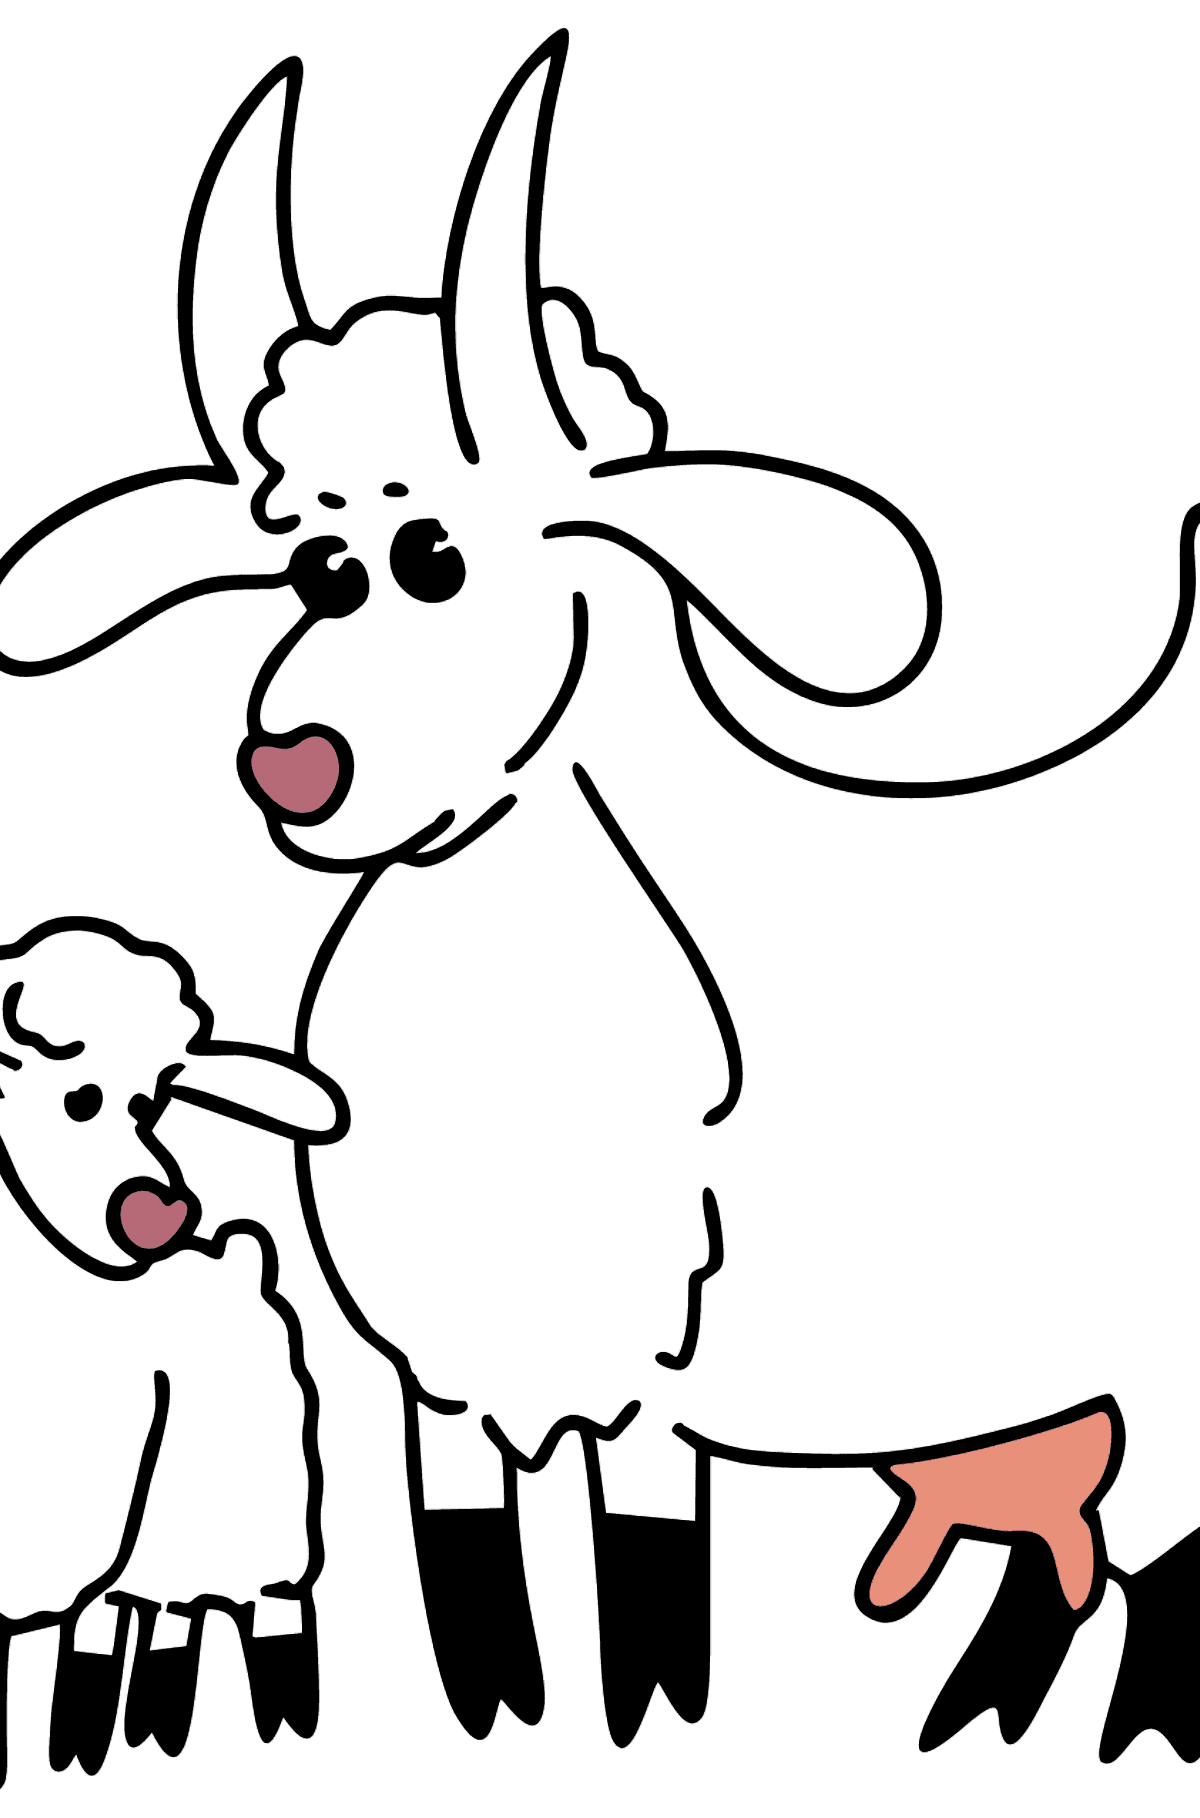 Goat and Kid coloring page - Coloring Pages for Kids